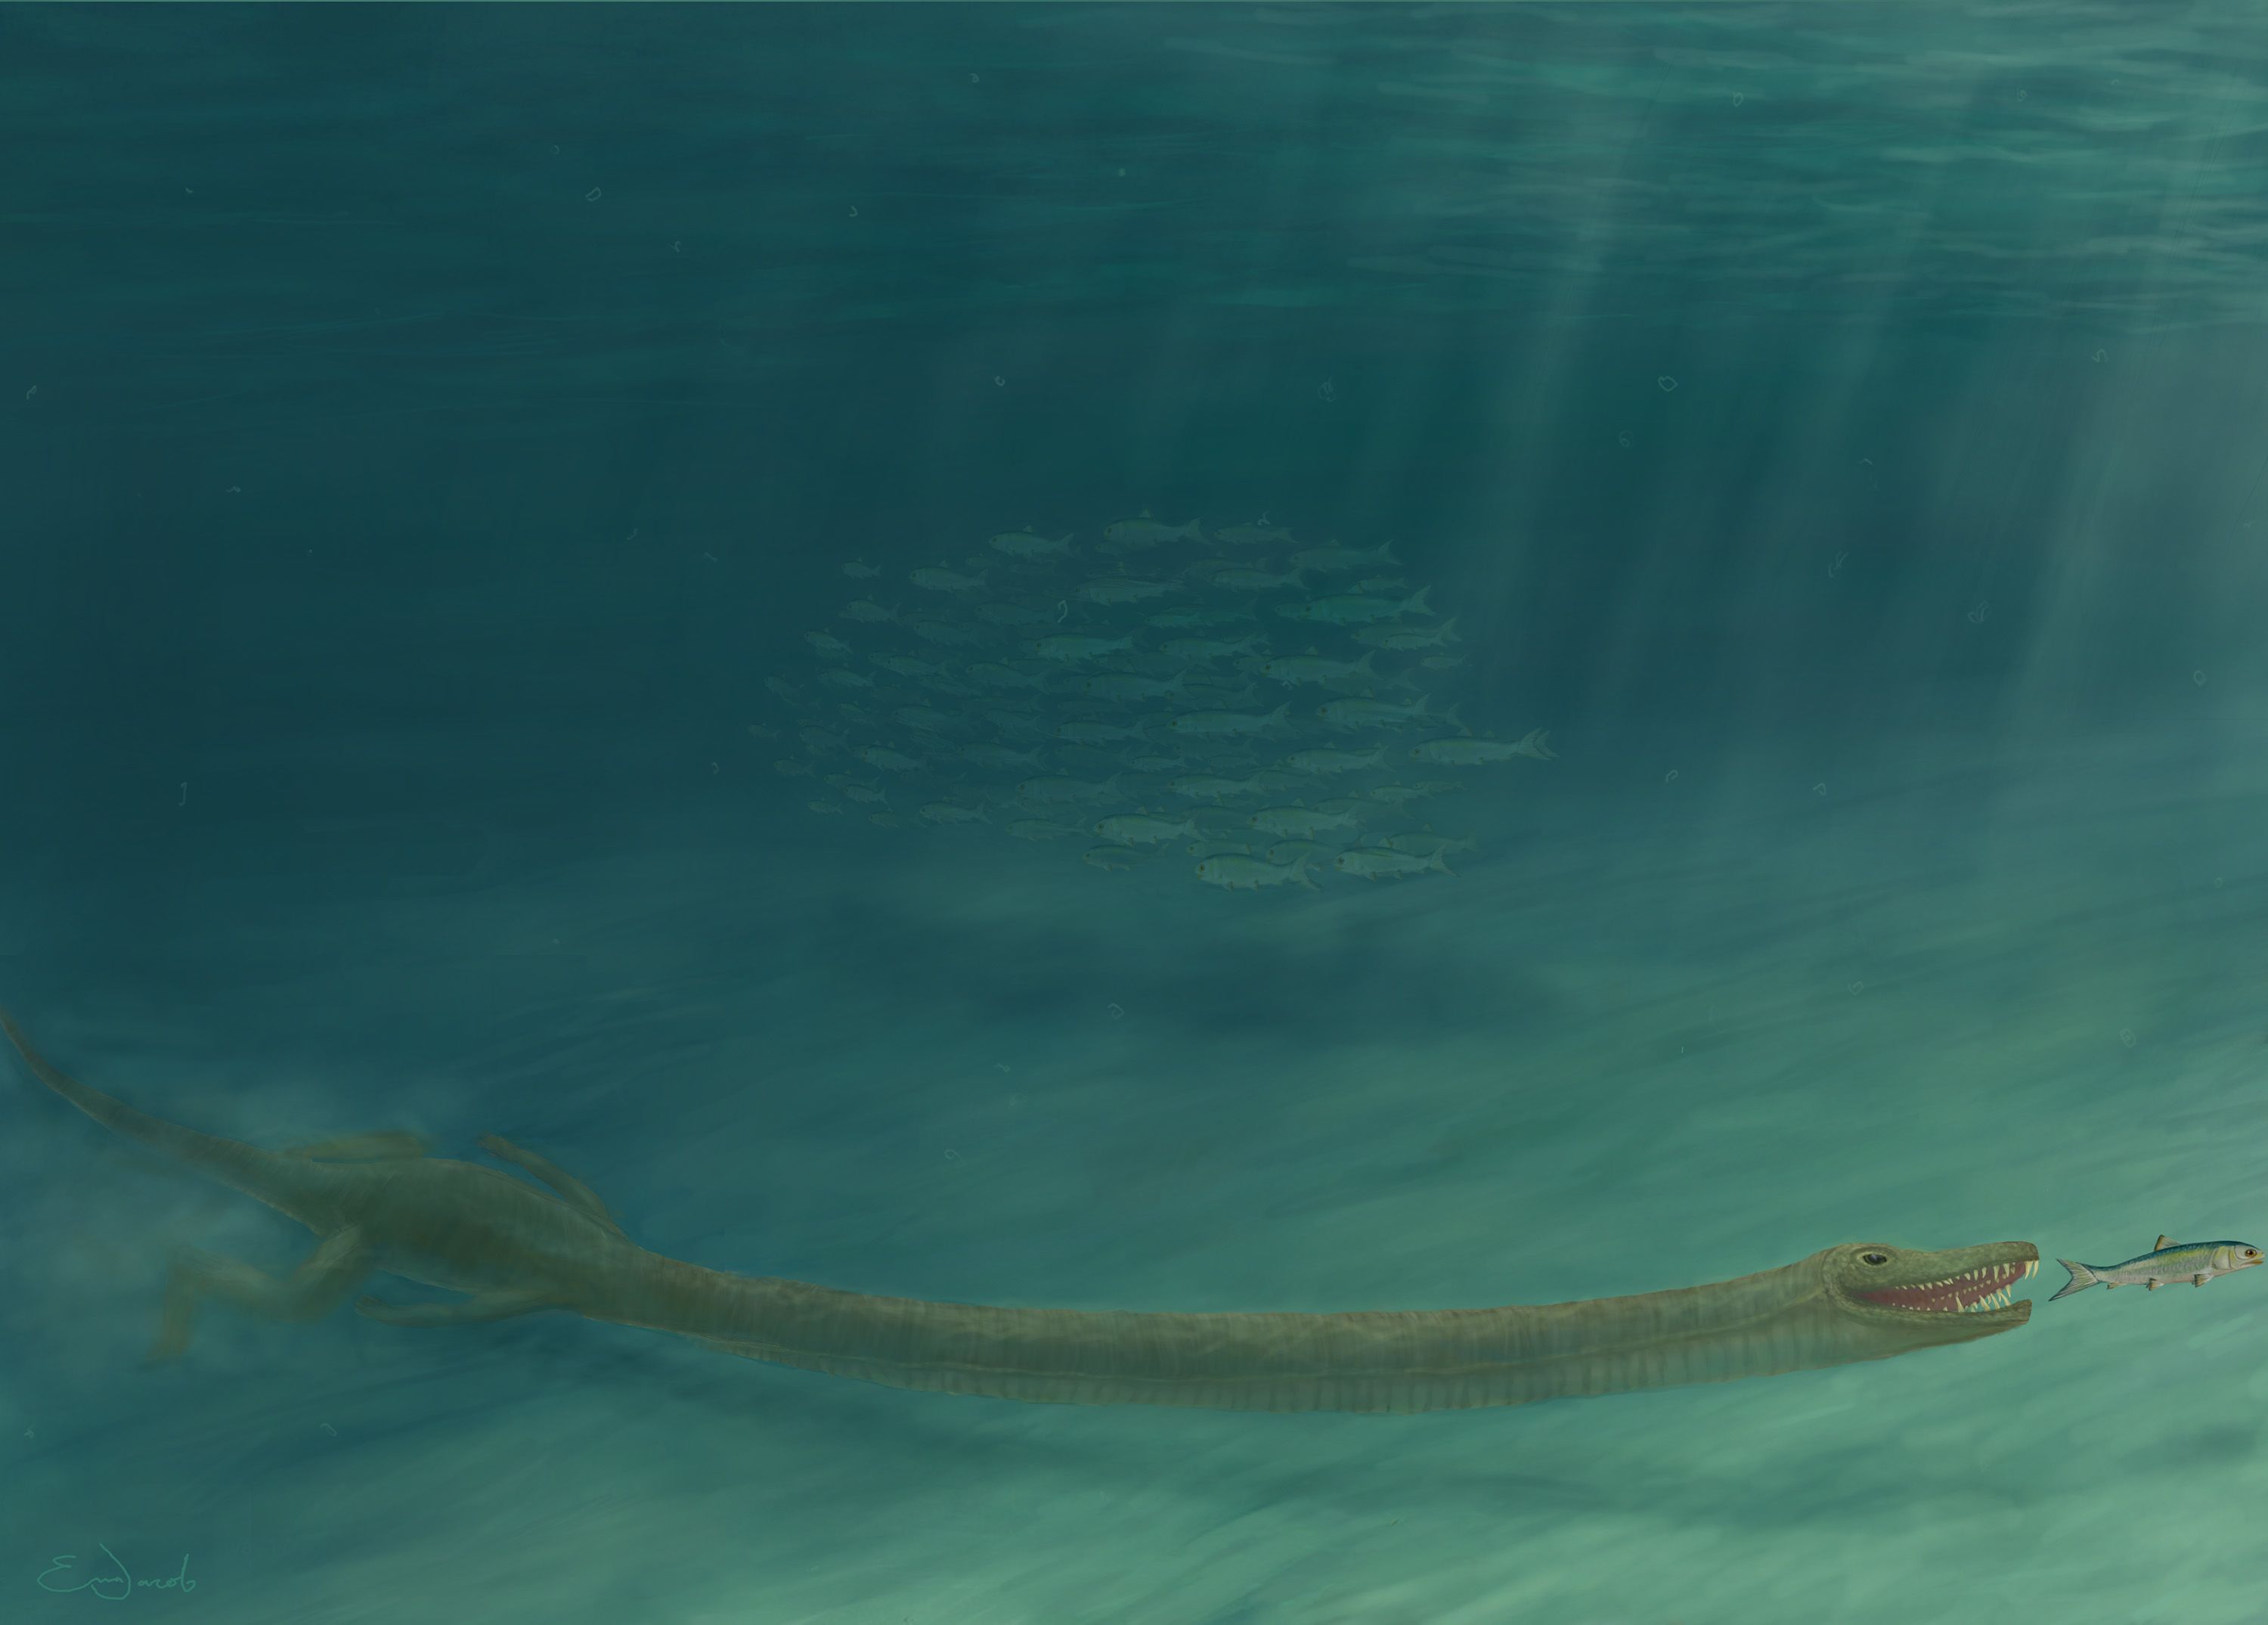 Scientists have unraveled the riddle of a real-life sea monster | CNN